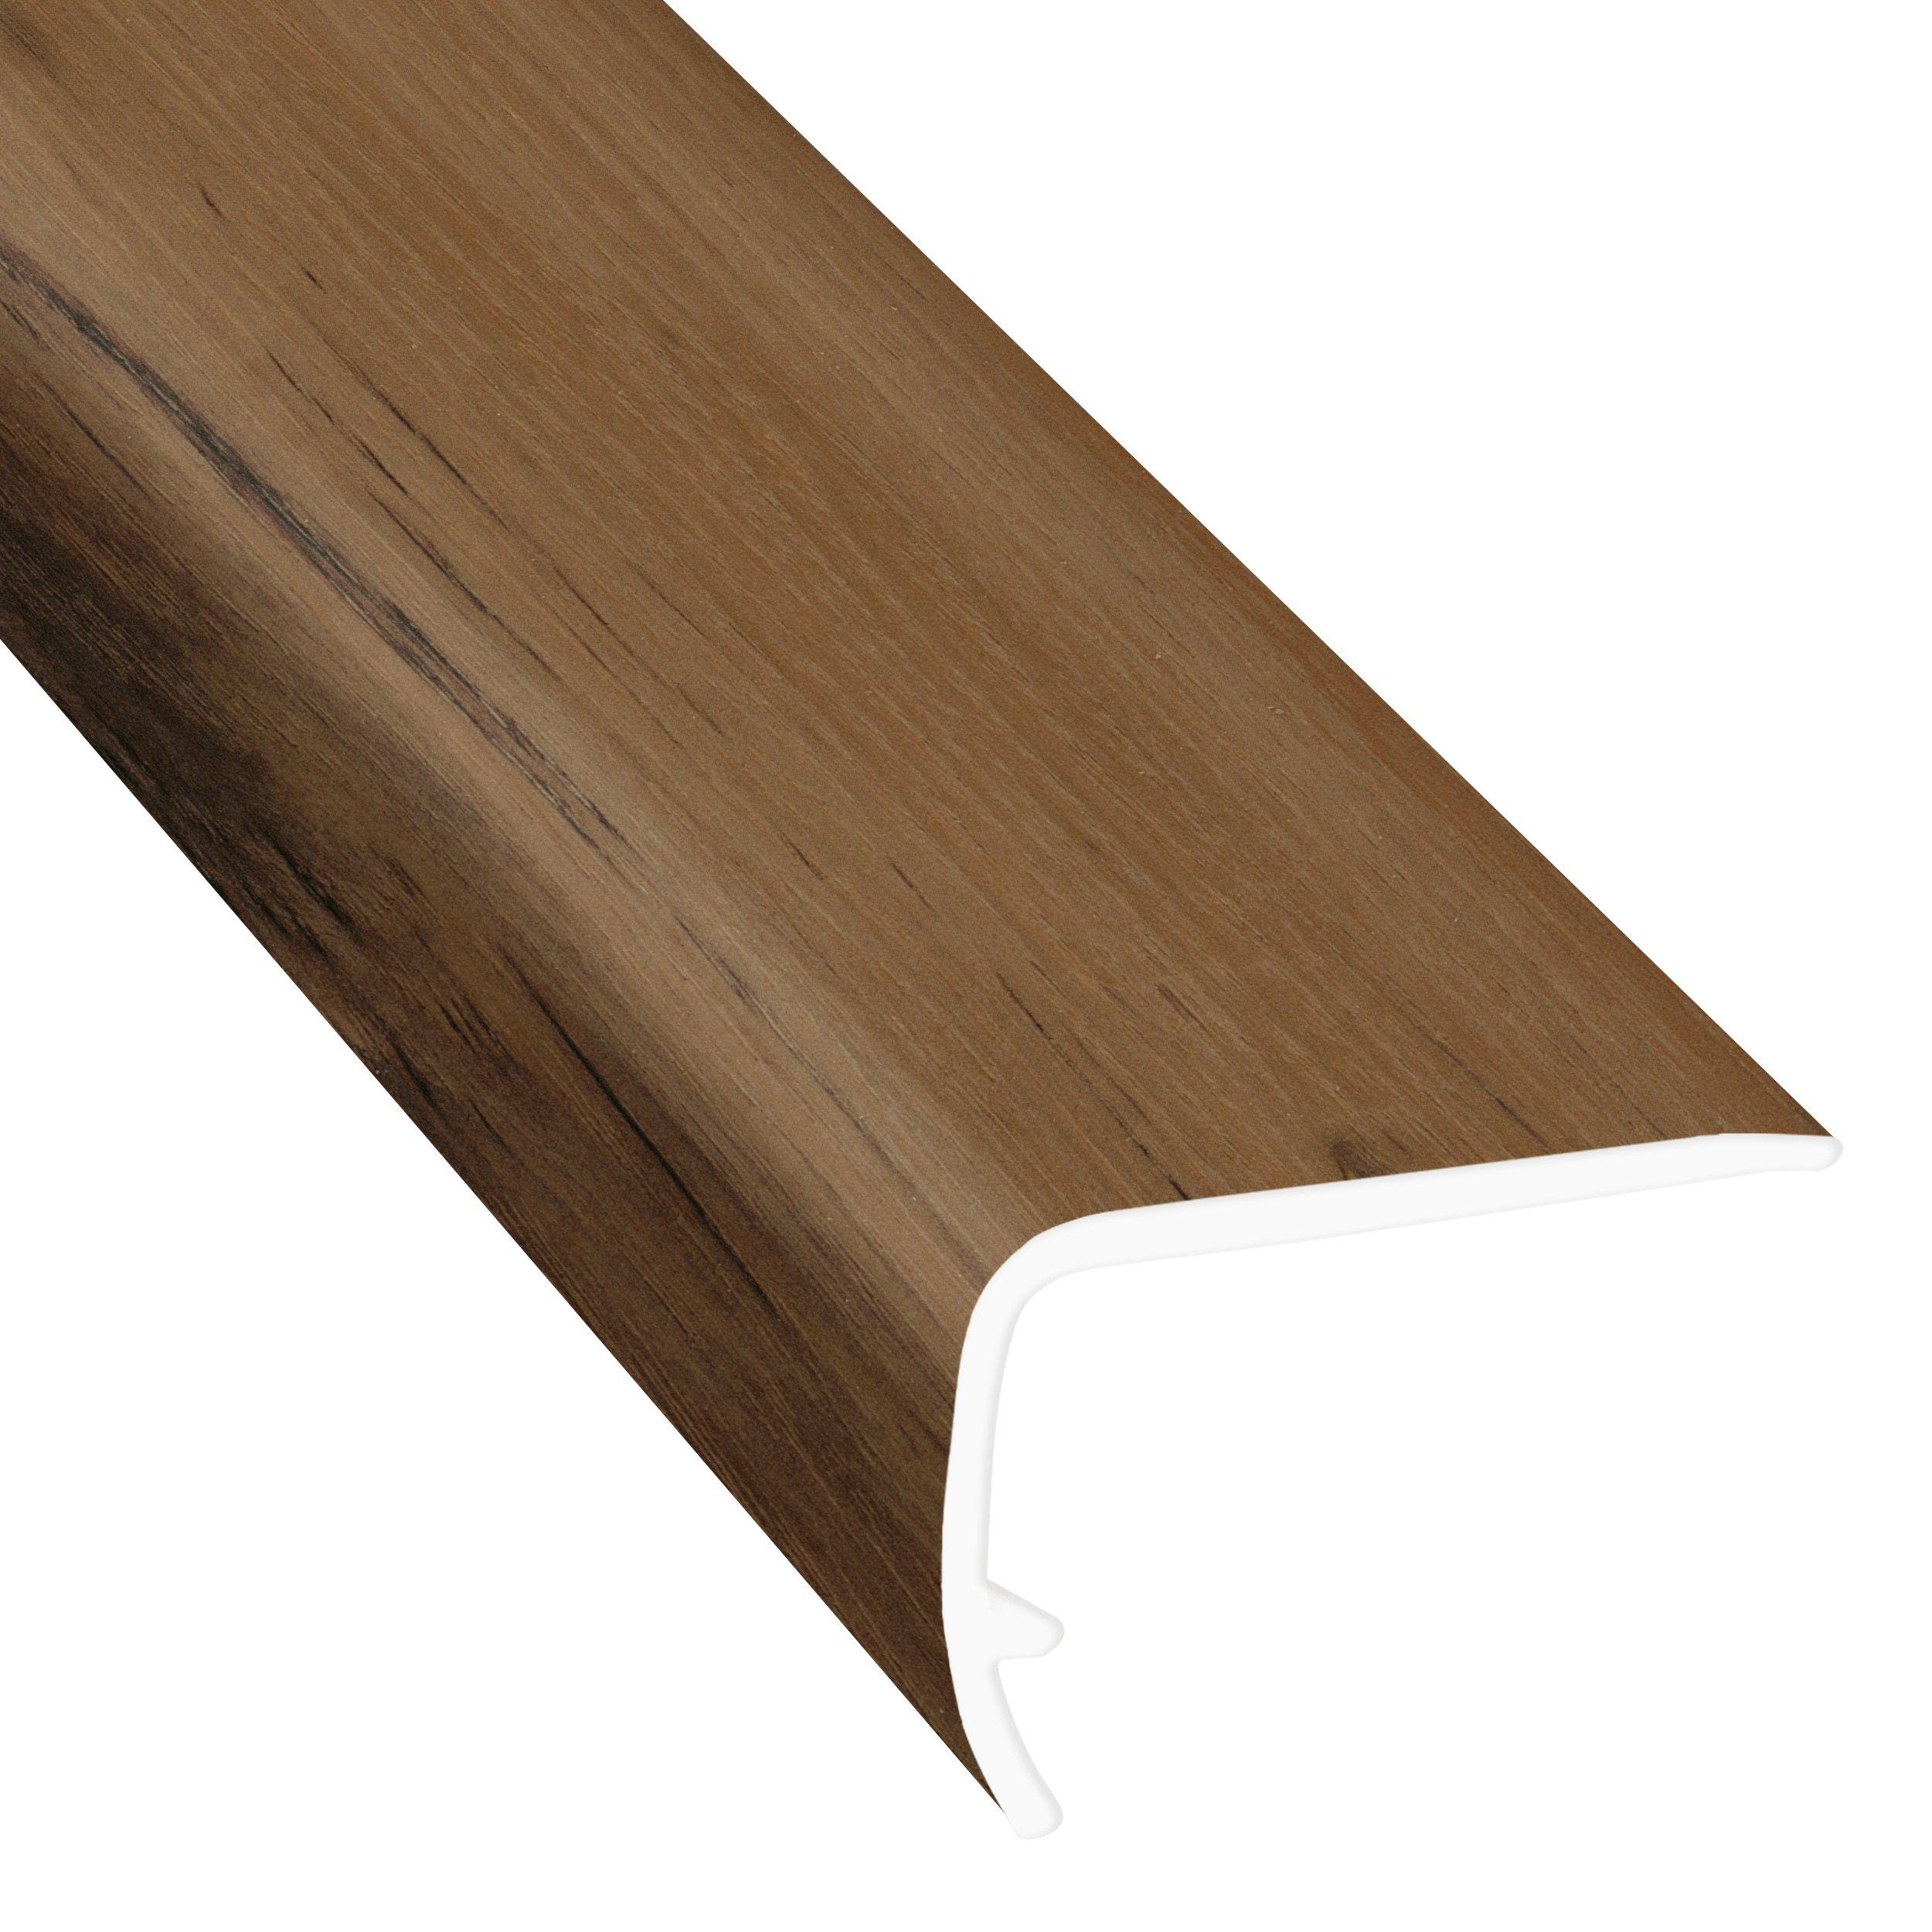 Smokehouse 94in. Vinyl Overlapping Stair Nose